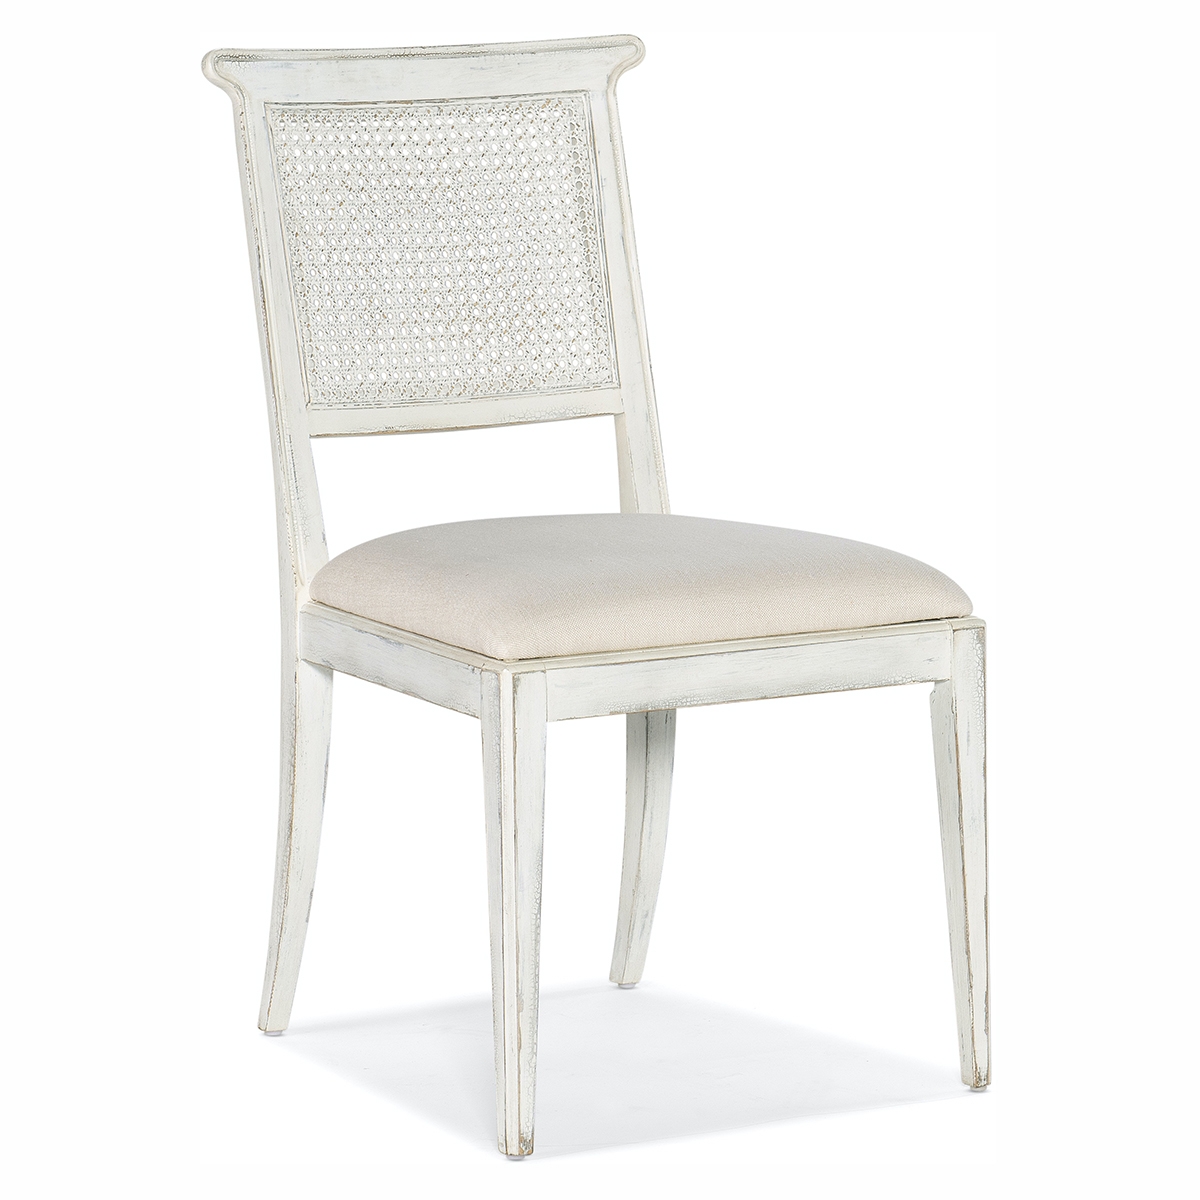 Picture of CHARLESTON WHITE CANE BACK CHAIR